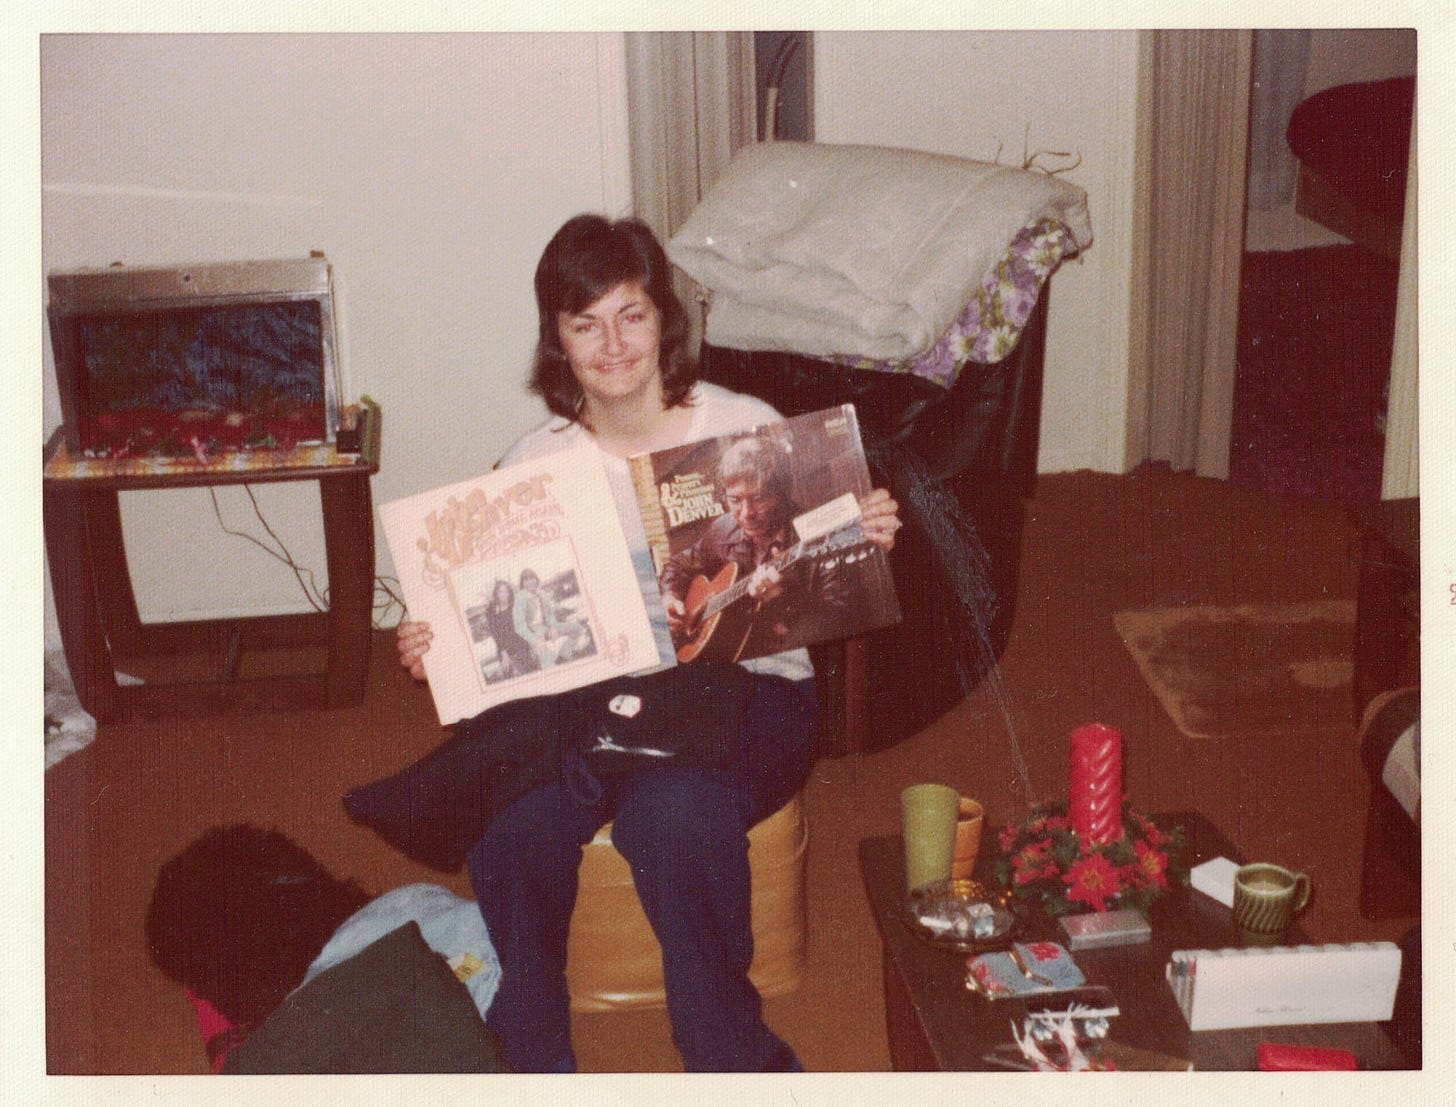 My mother, receiving John Denver albums gifted to her by my father.